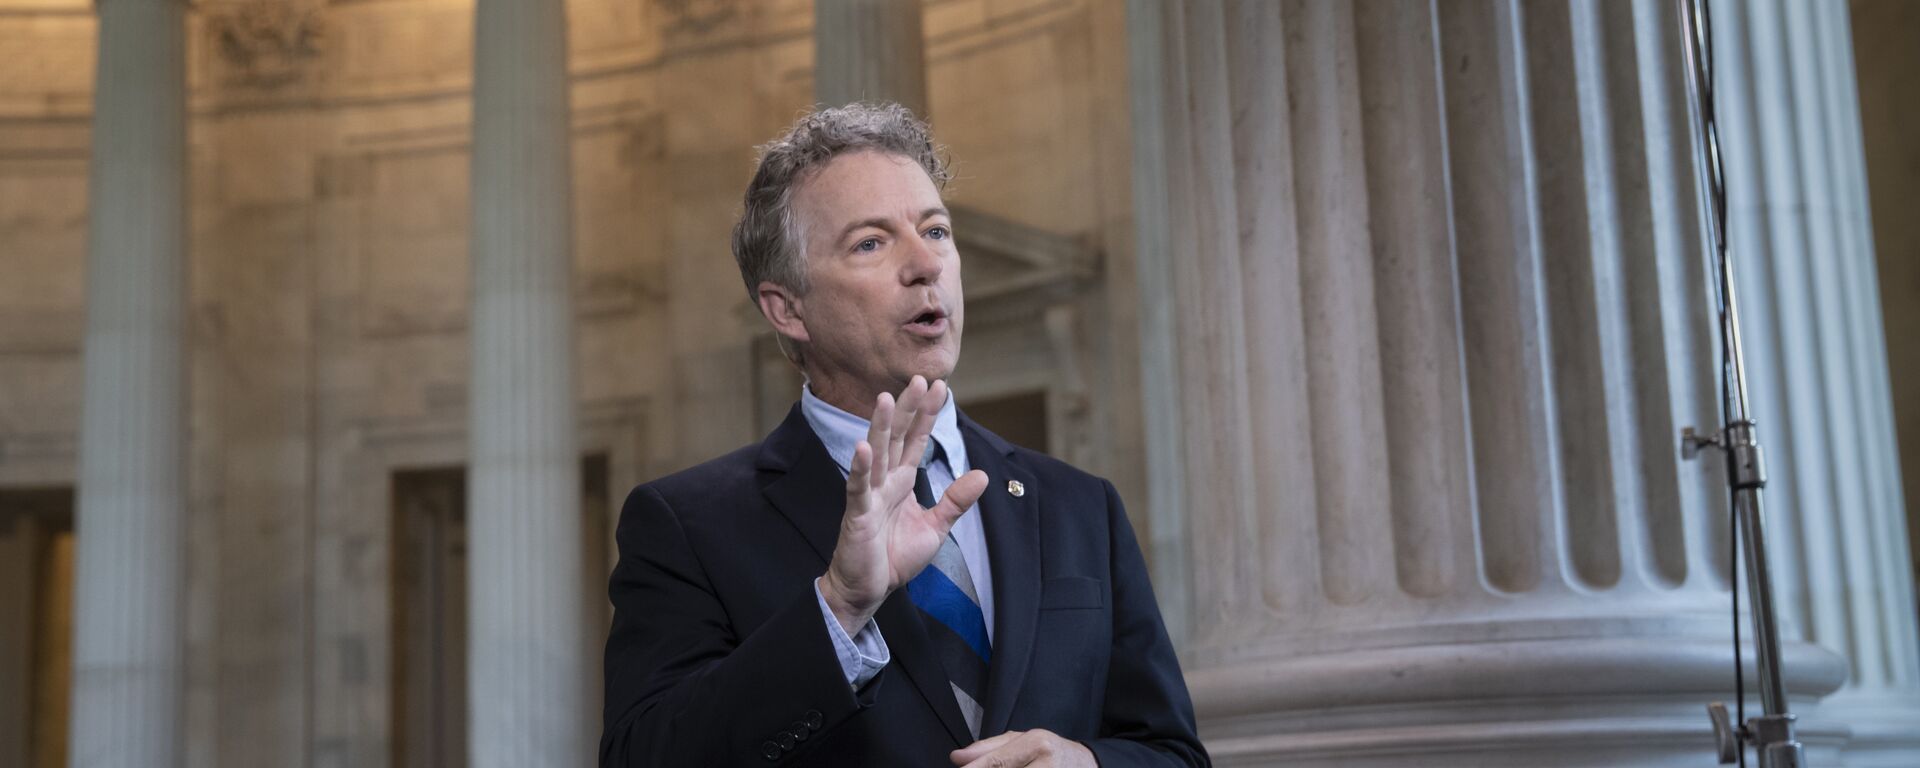 During a TV news interview, Sen. Rand Paul, R-Ky., defends President Donald Trump and his Helsinki news conference with Russian President Vladimir Putin whereTrump appeared to cast doubt on U.S. intelligence findings that Russia interfered in the 2016 election, on Capitol Hill in Washington, Tuesday, July 17, 2018 - Sputnik International, 1920, 26.04.2022